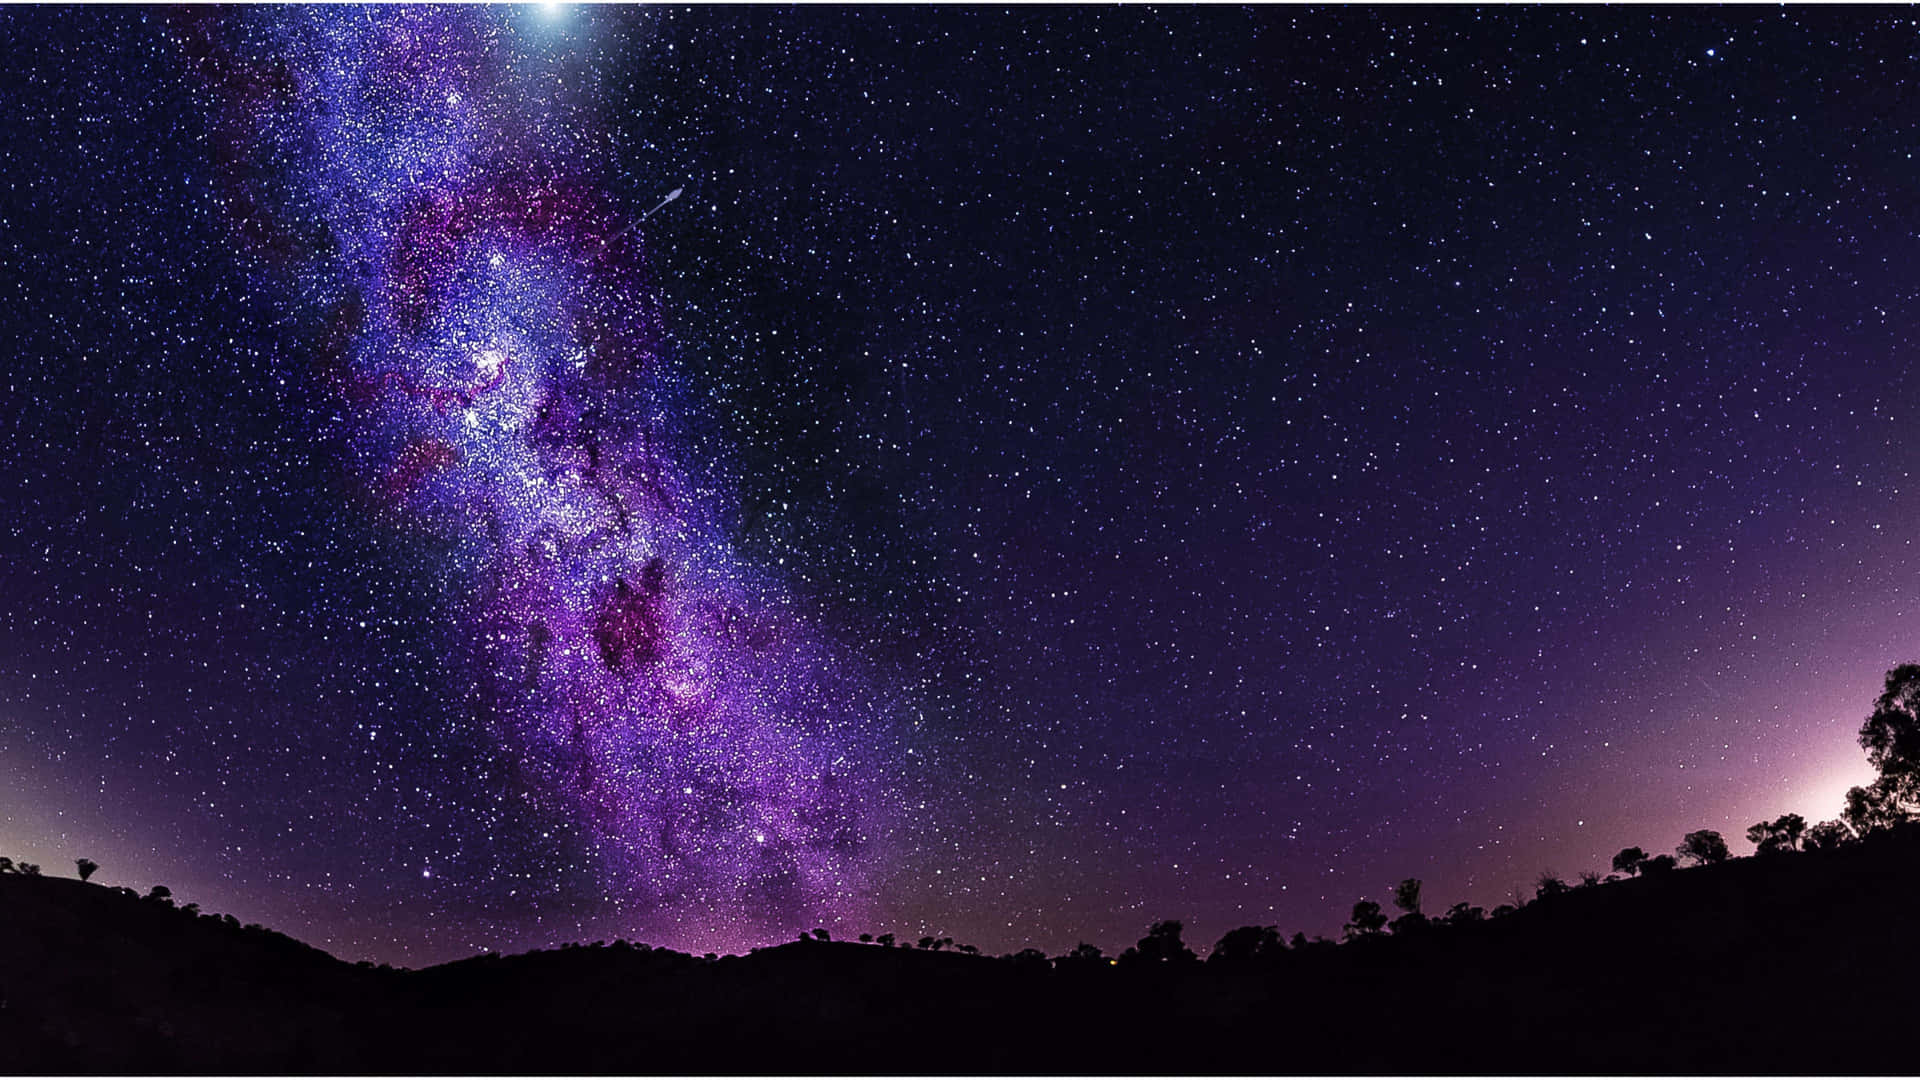 "Gaze up at the heavens and take in the wondrous sights of its stars filling the night sky." Wallpaper